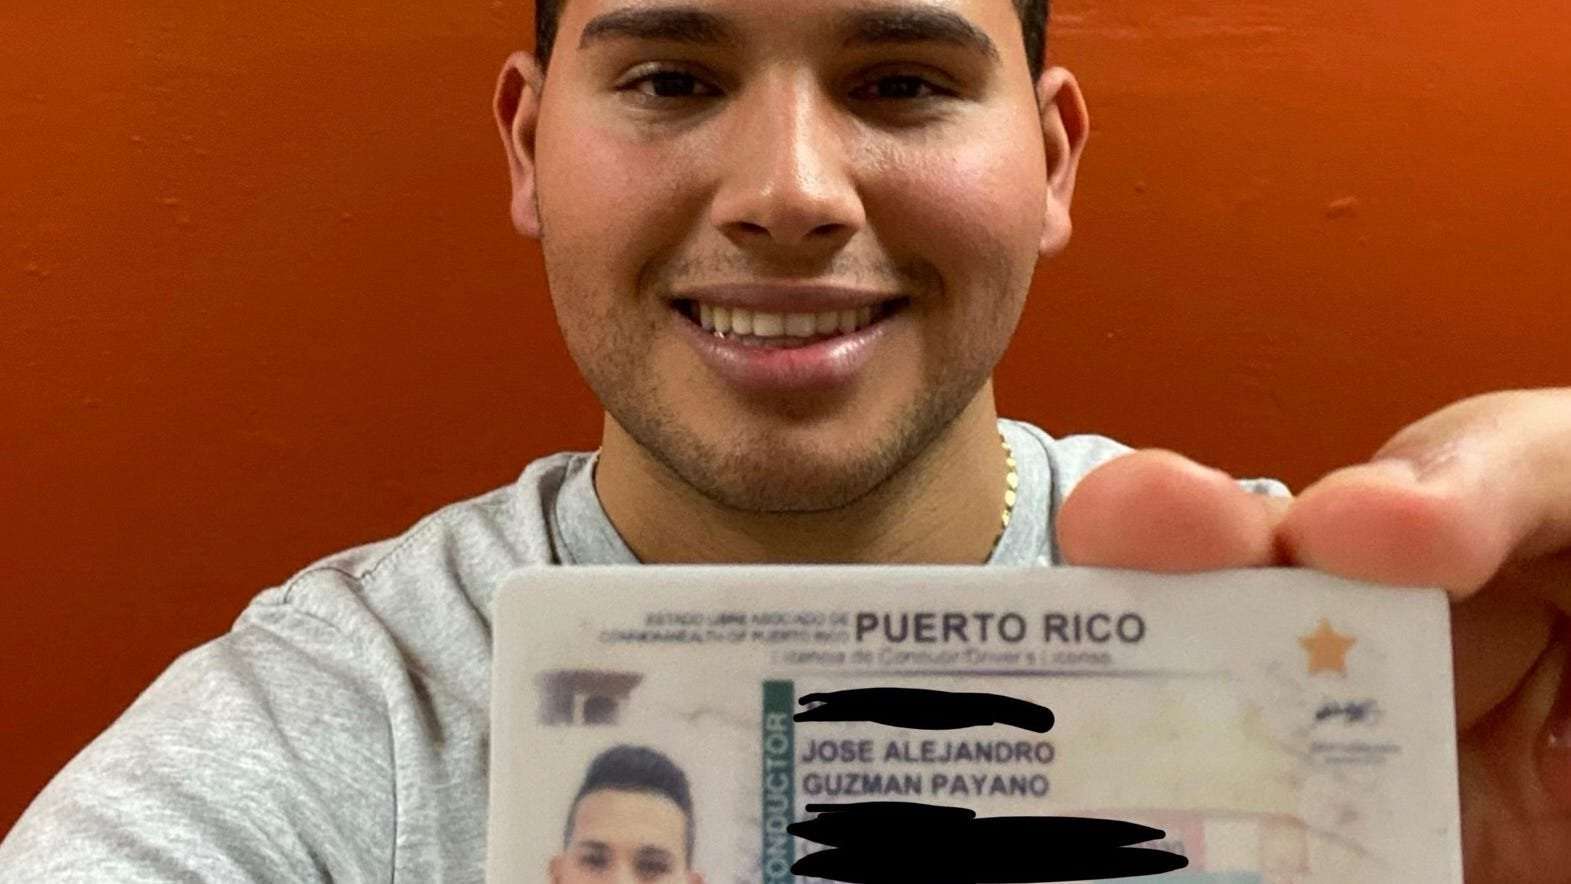 image for CVS asks Puerto Rican student for immigration papers to buy cold meds